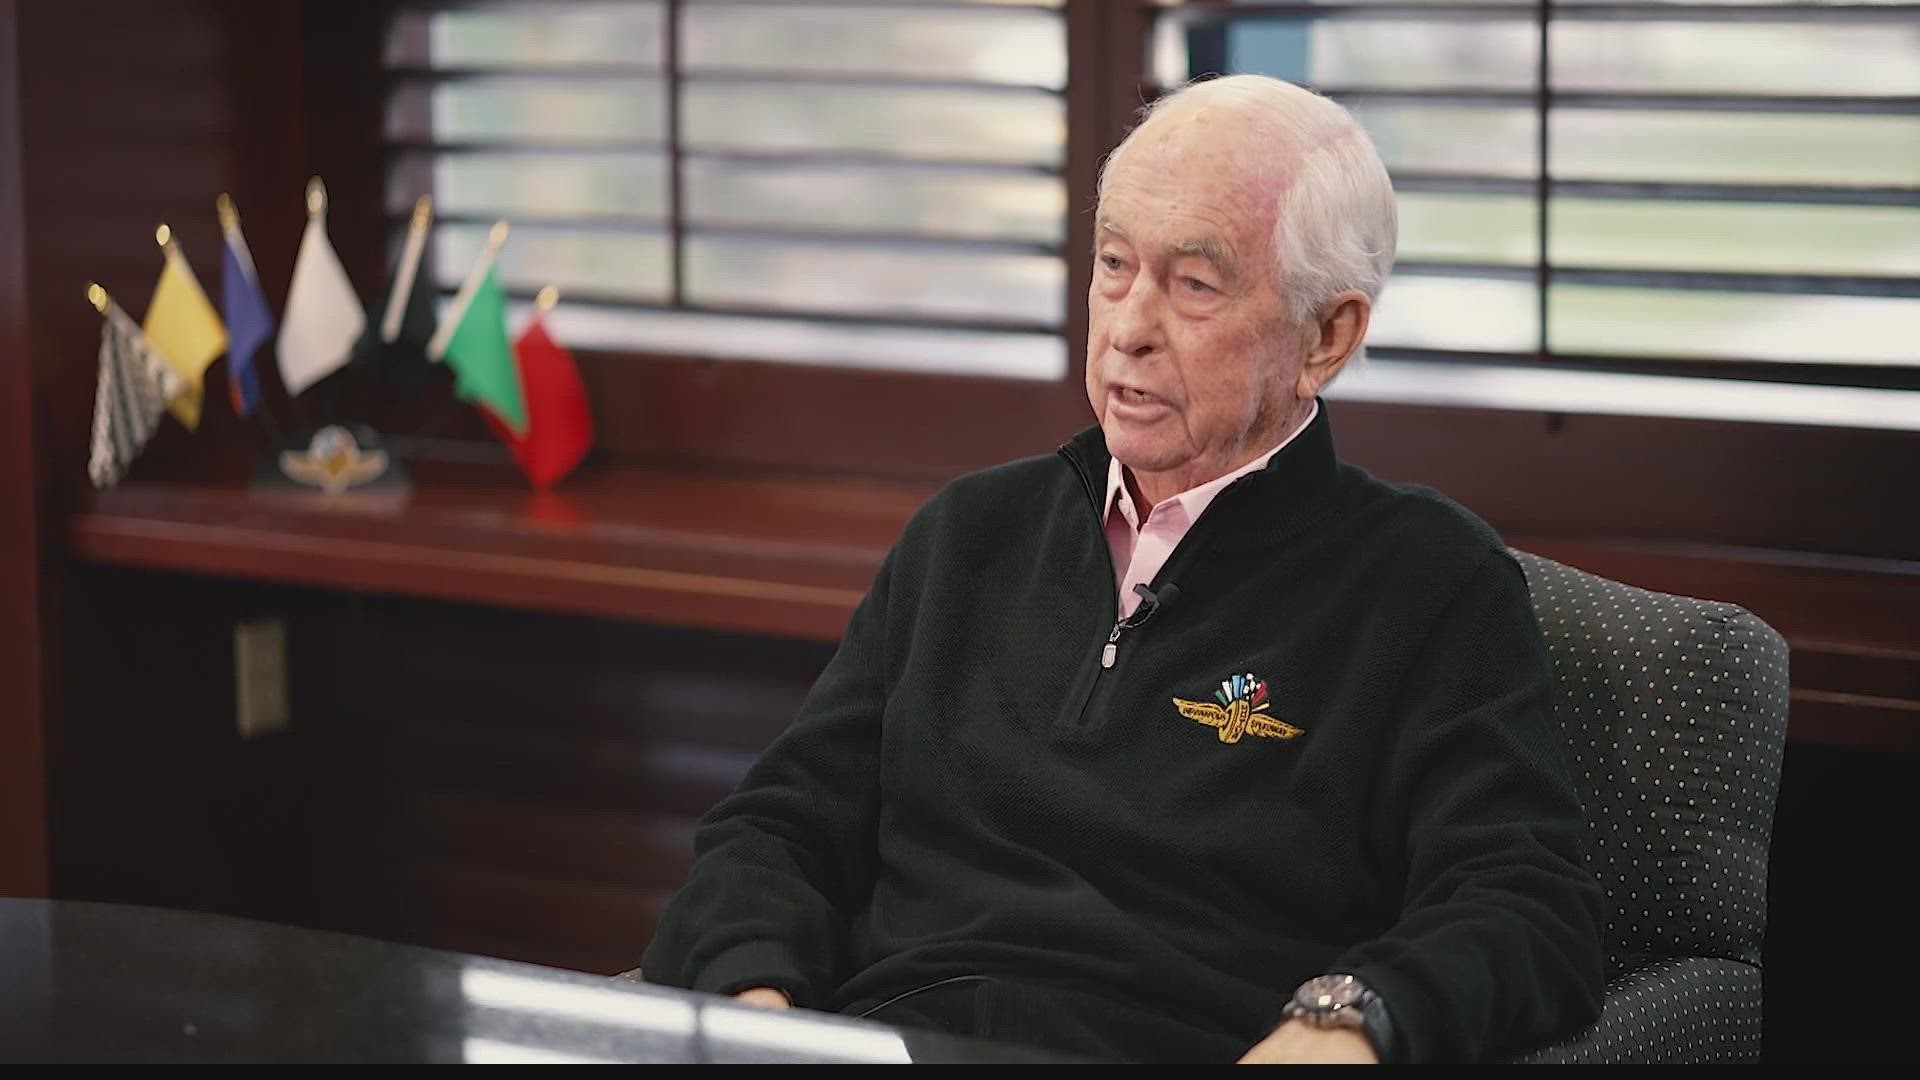 Dave Calabro snagged an exclusive interview with the man preserving Indy 500 history, while keeping an eye on the future.